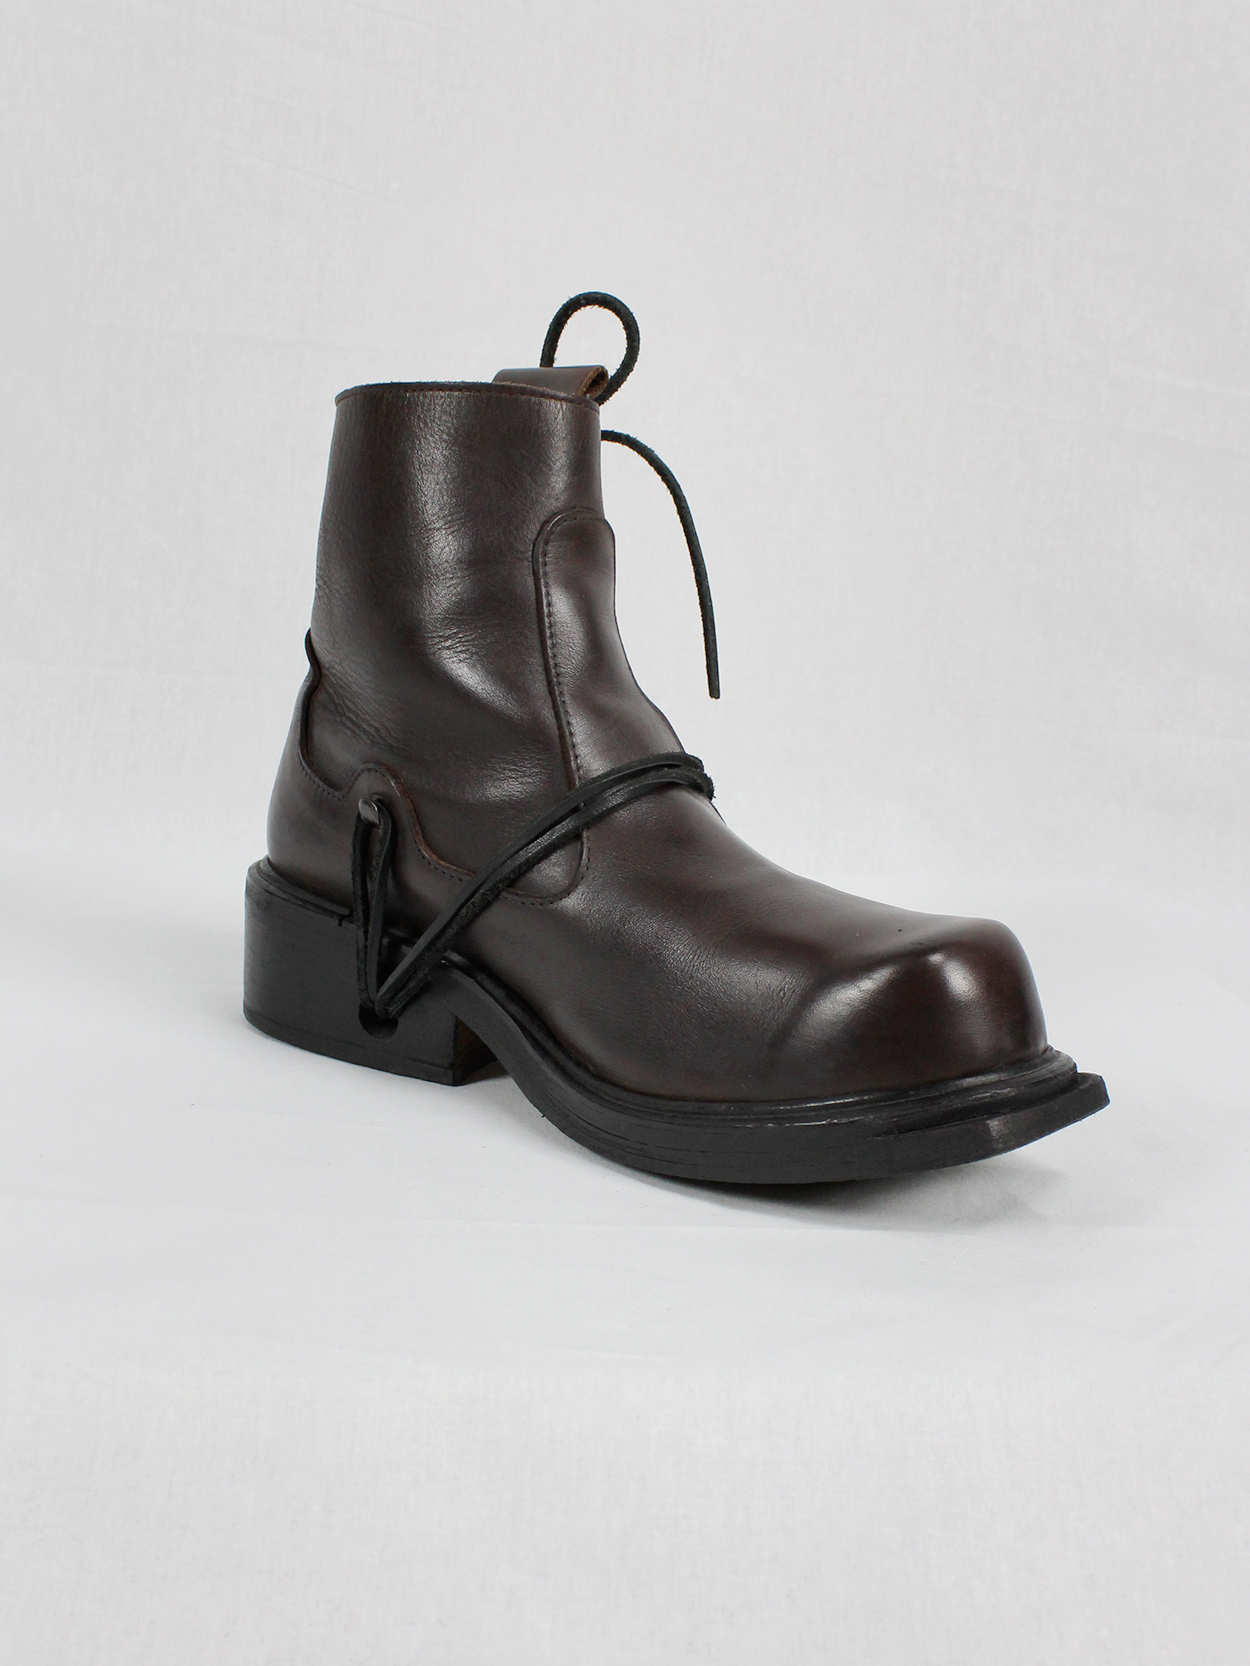 vaniitas Dirk Bikkembergs brown boots with hooks and laces through the soles 44 90s 1990s (15)